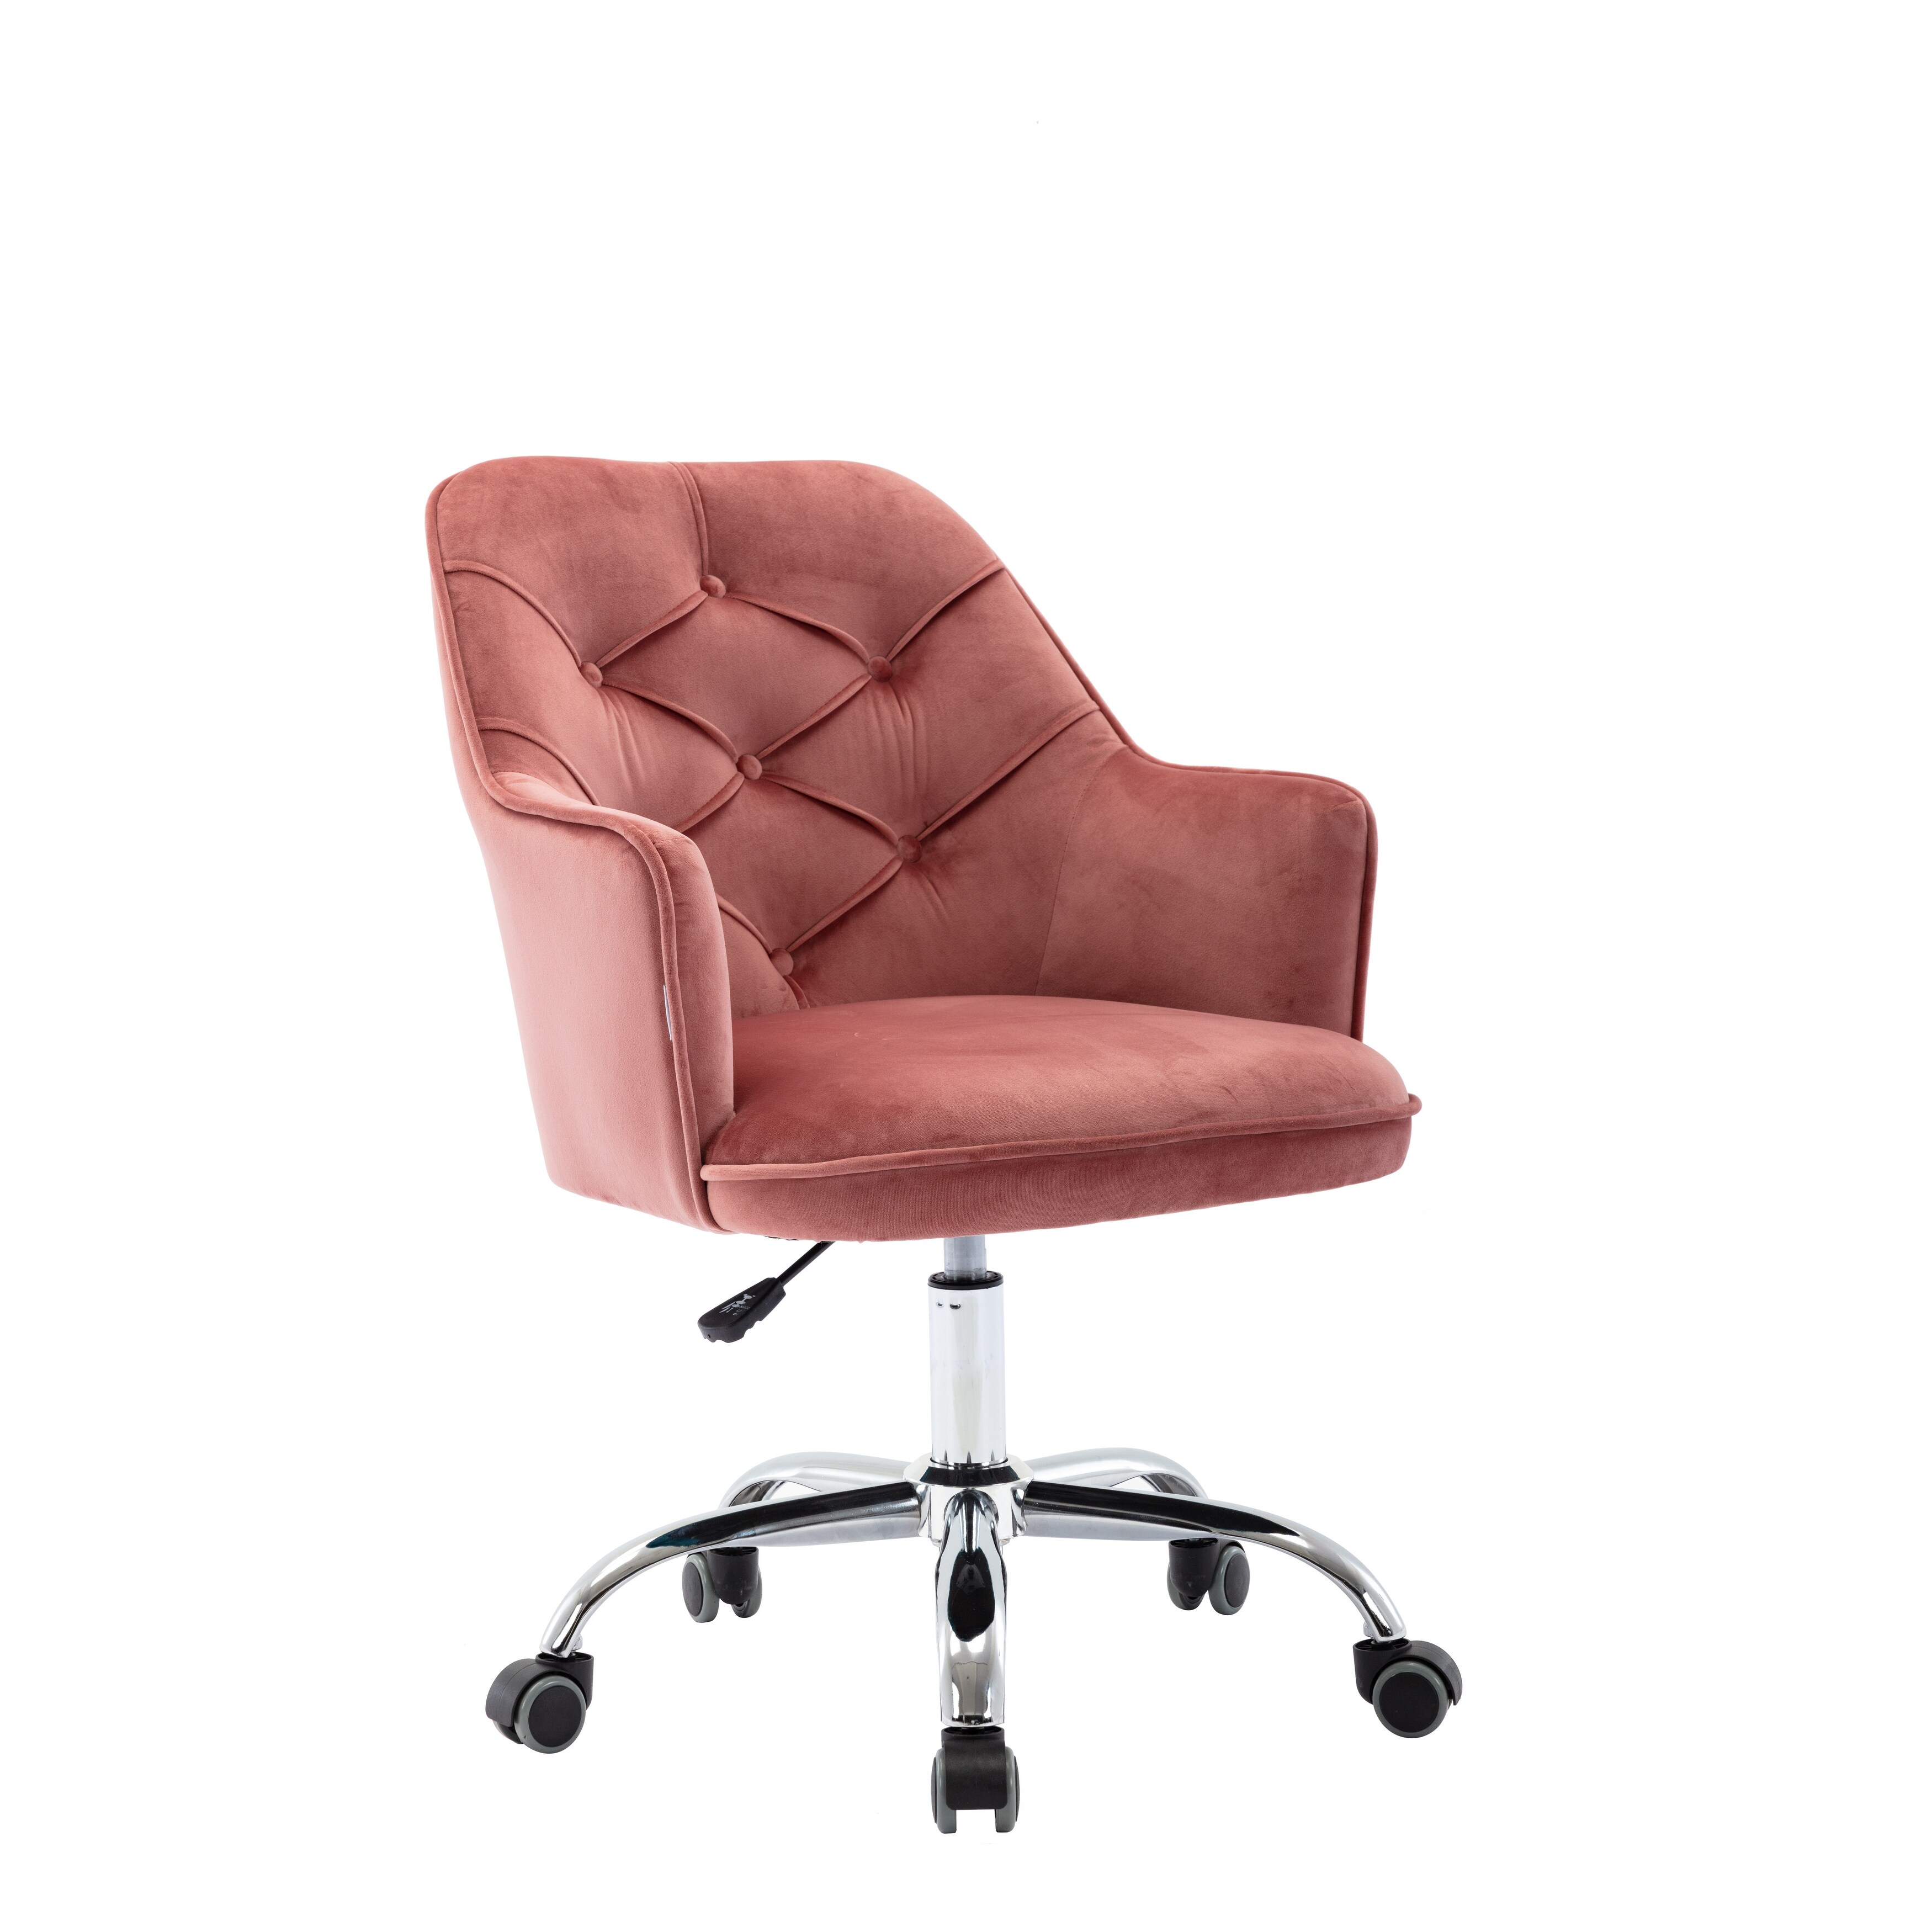 Upgrade Your Office Aesthetic and Comfort with the Modern Velvet Swivel Office Chair, Offering Adjustable Height